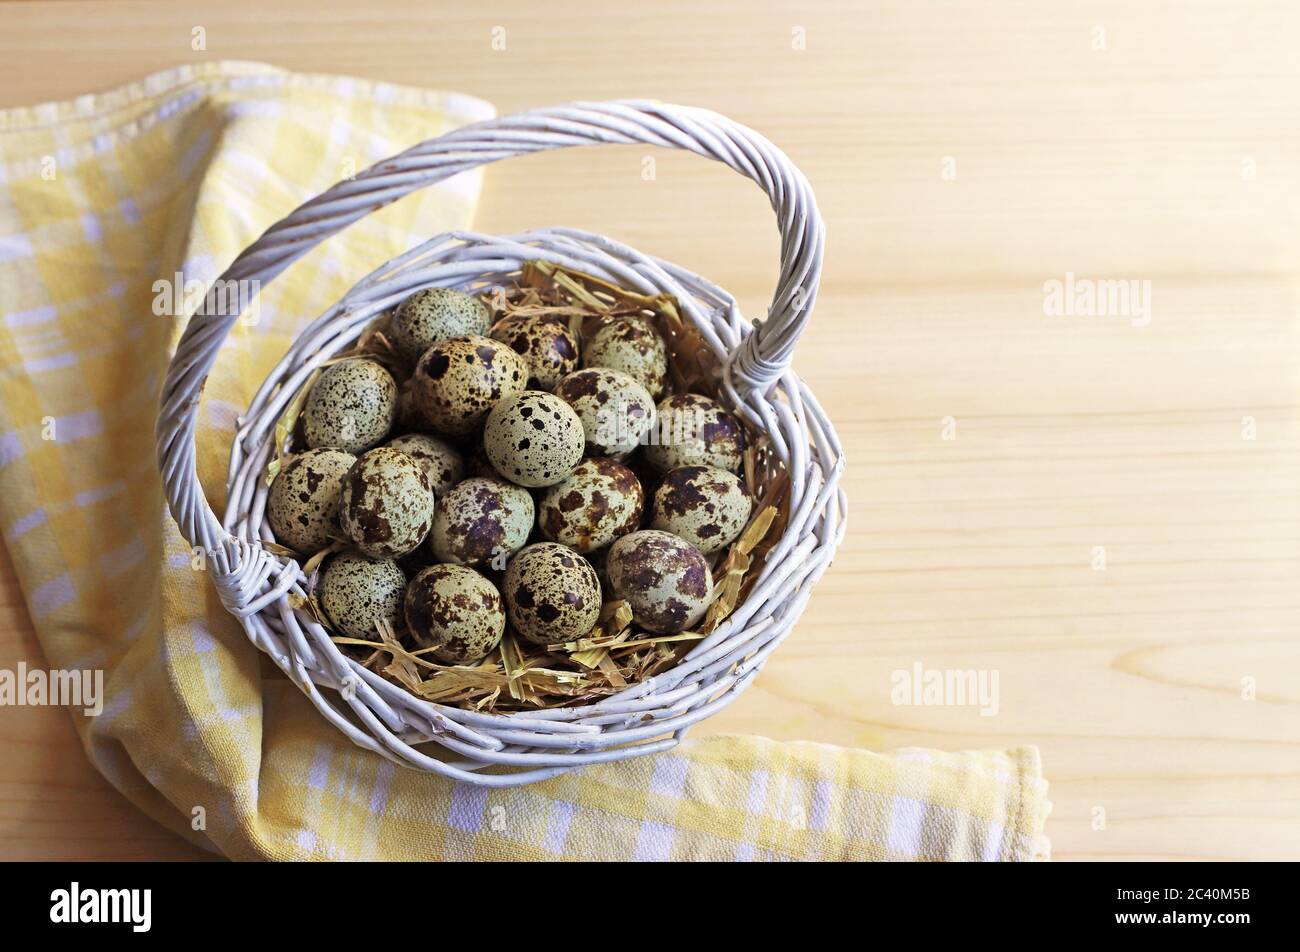 wicker basket with spotted quail eggs standing on a wooden table Stock Photo